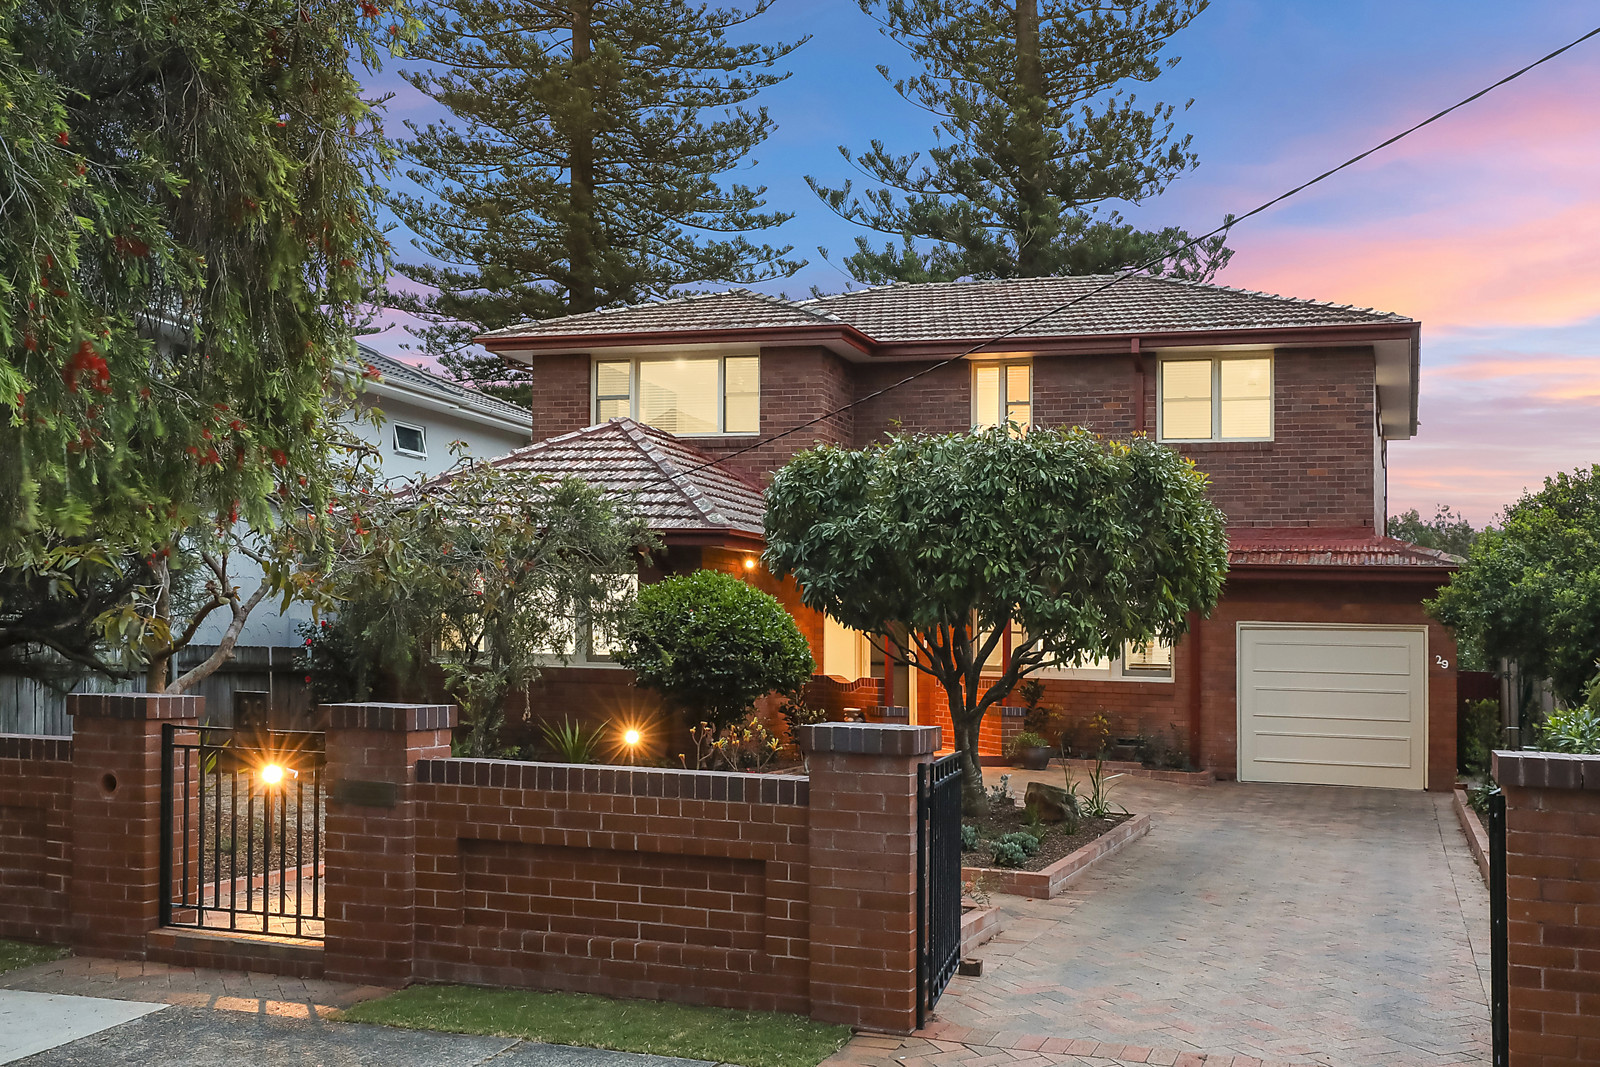 29 Eurobin Avenue, Manly featured